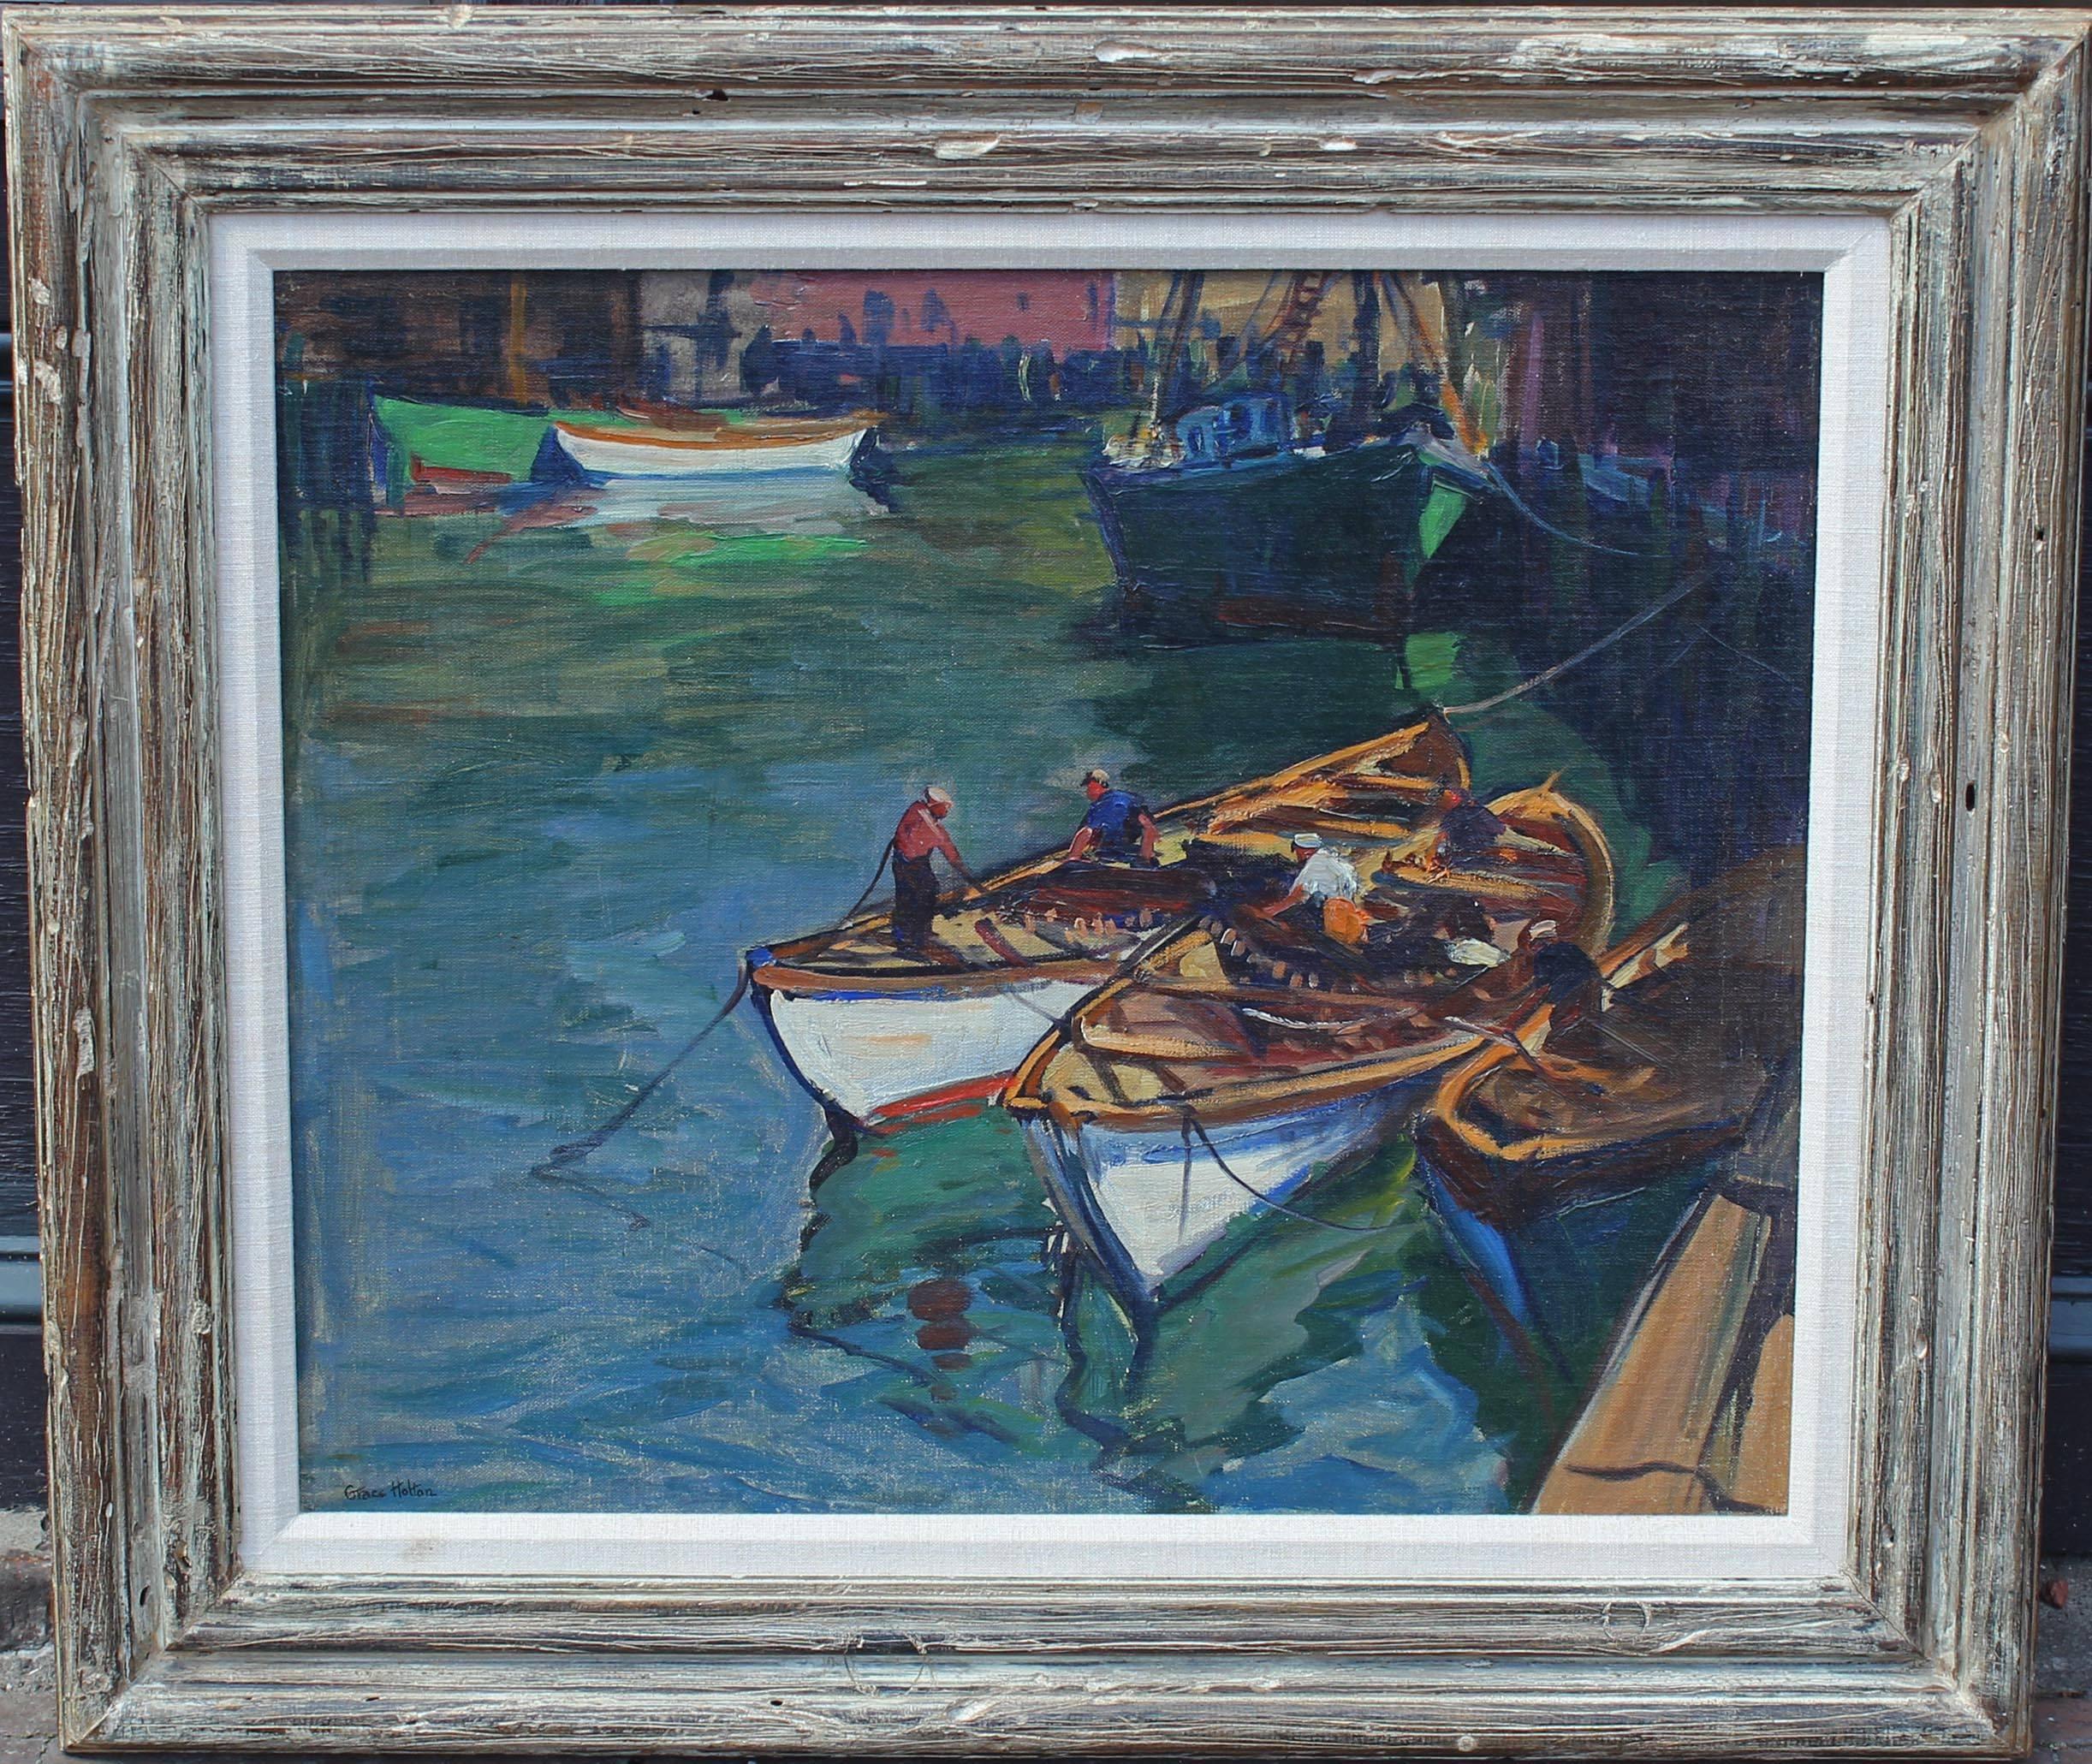 Impressionist oil painting by Grace Holton (American 1883-1964). Fisherman bringing in their catch into harbour. Oil on canvas early 20th century. Original vintage frame.
Holton studied at New York University, Pratt Institute in New York and